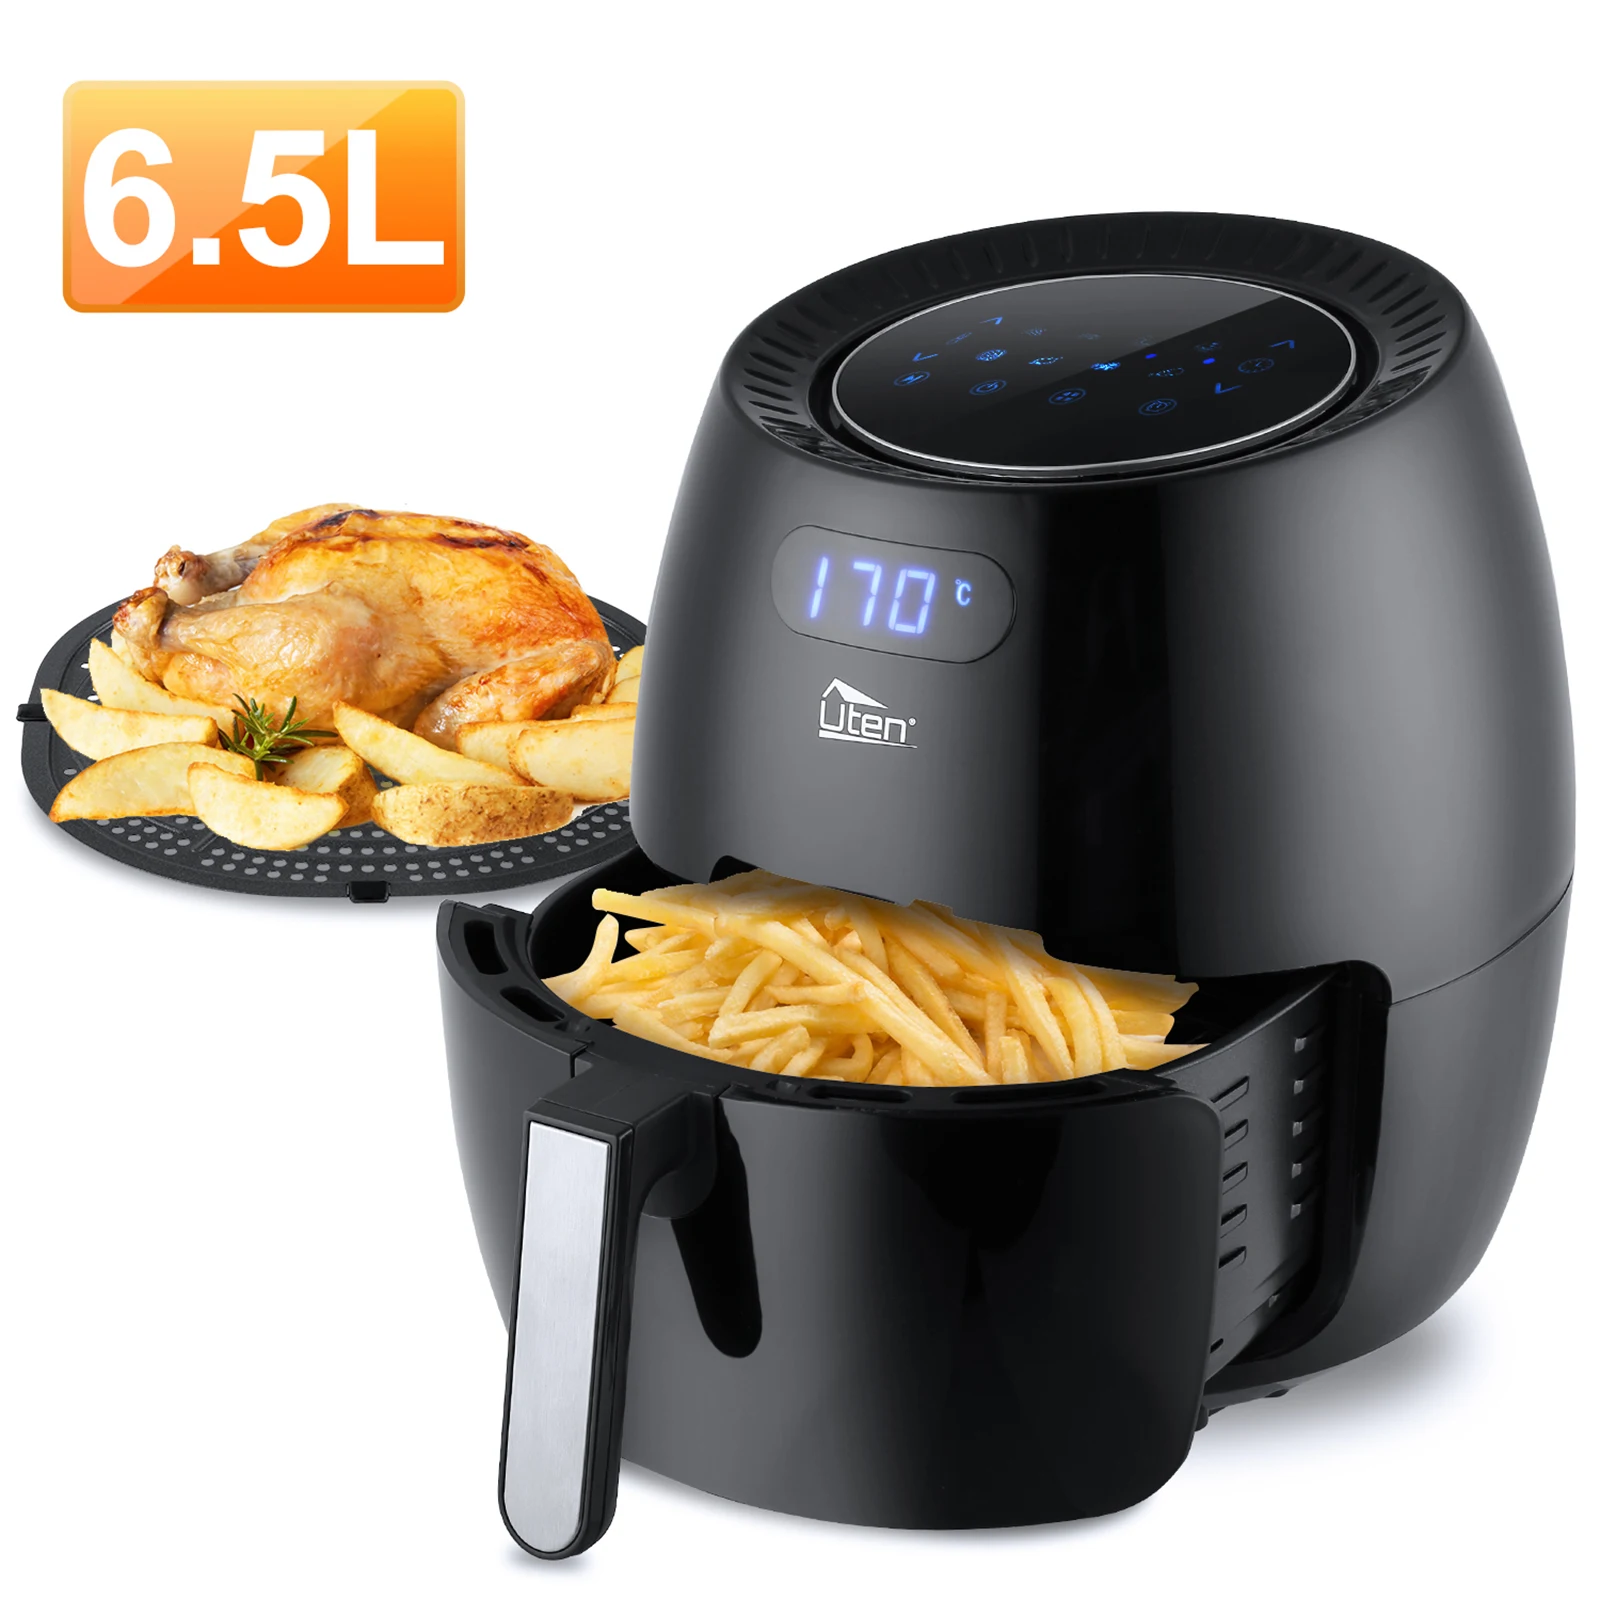 Uten 6.5L Air Fryer with Digital Display Electric Non-Stick Oven Oilless Health Cooker 8 Cooking Preset and Adjustable Temp/Time